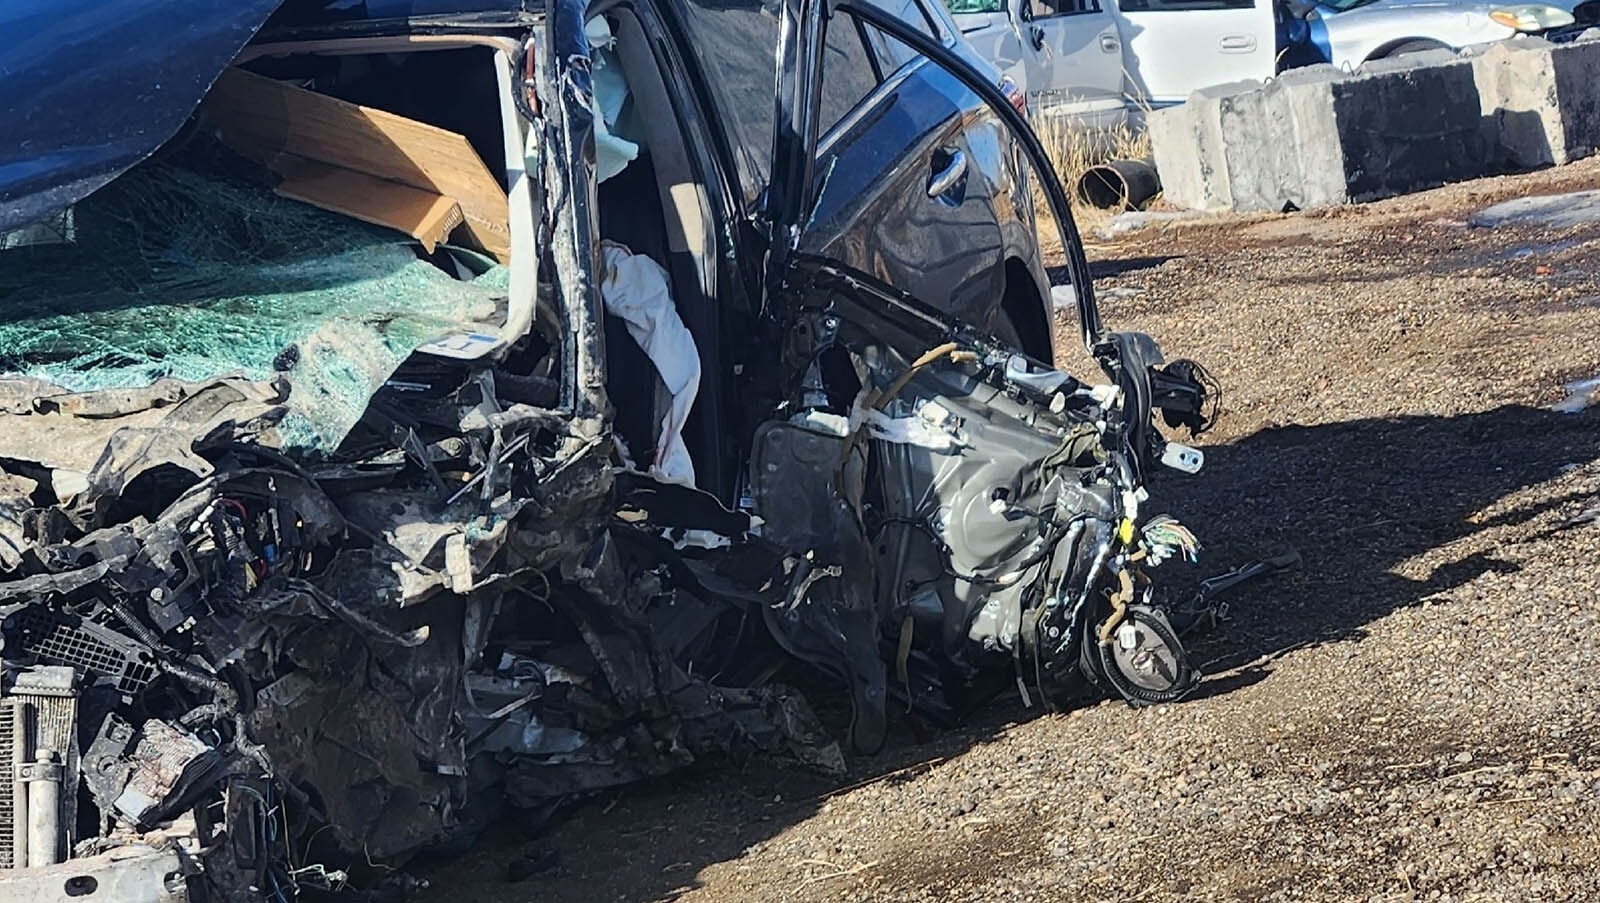 Richard King's vehicle after a head-on collision Nov. 30.